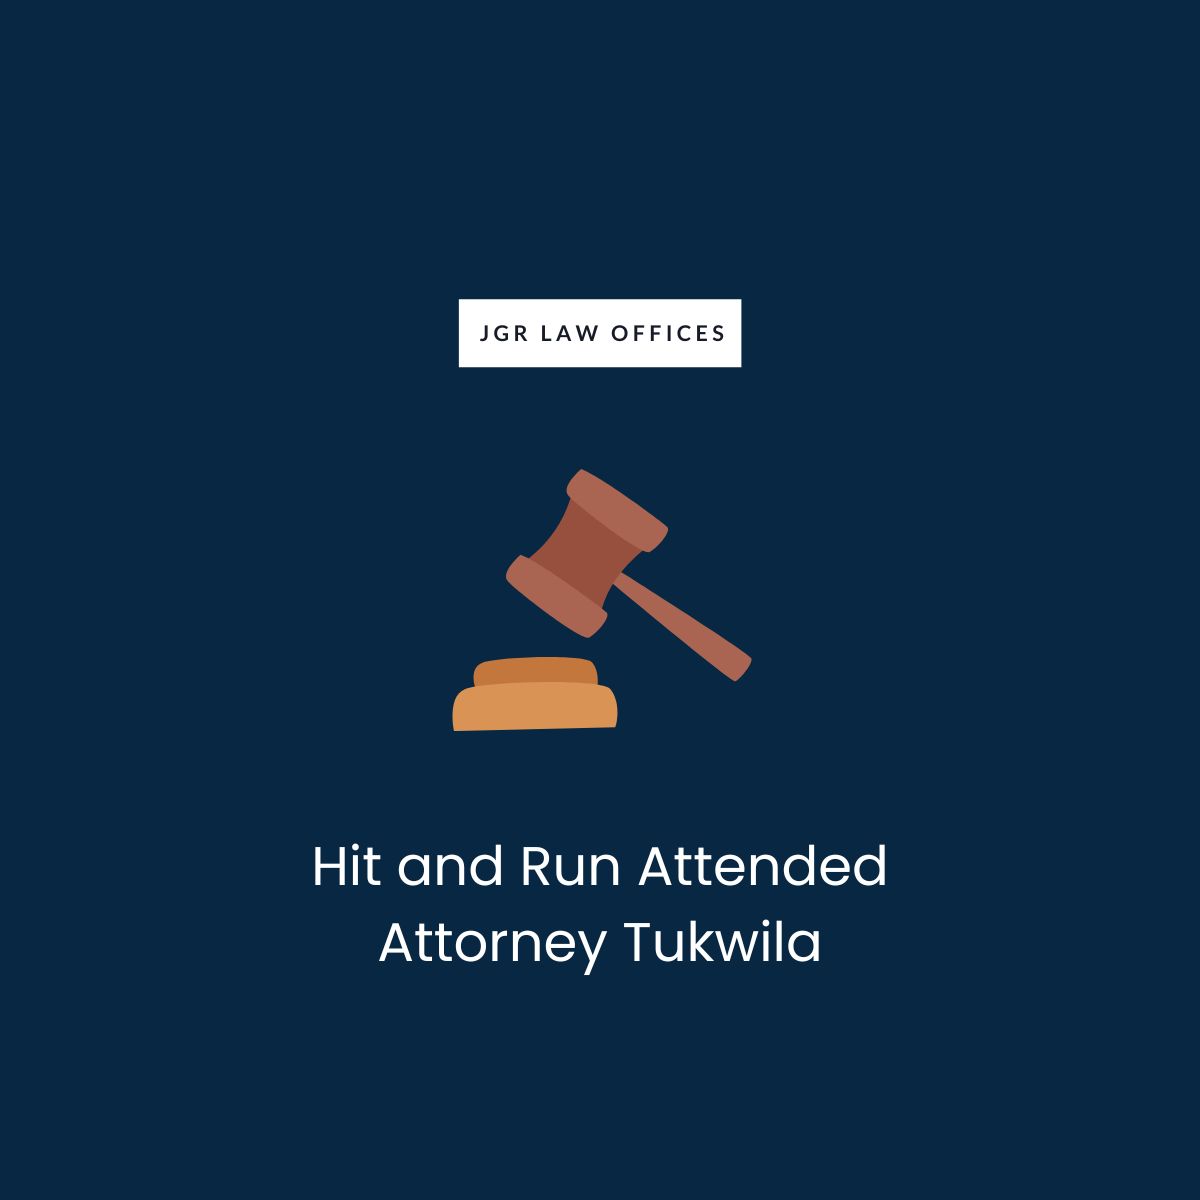 Hit and Run Attended Attorney Tukwila